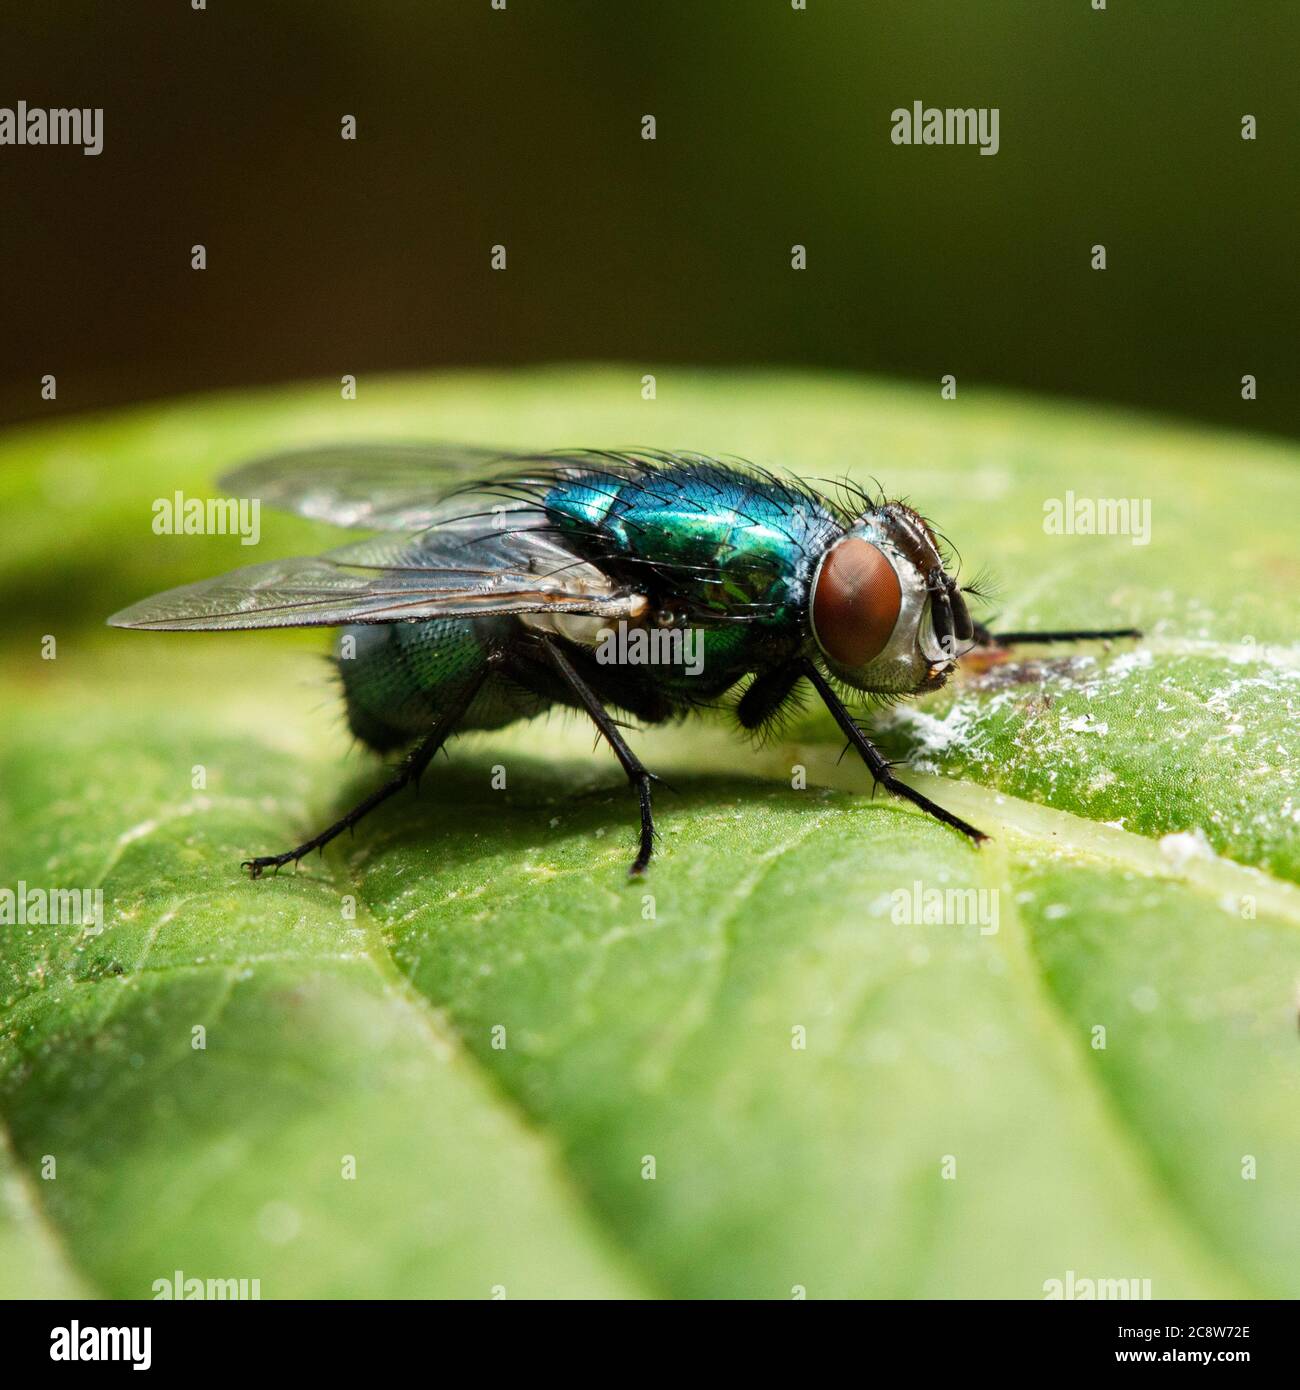 extreme close up of a greenbottle fly on a green leave in the UK Stock Photo